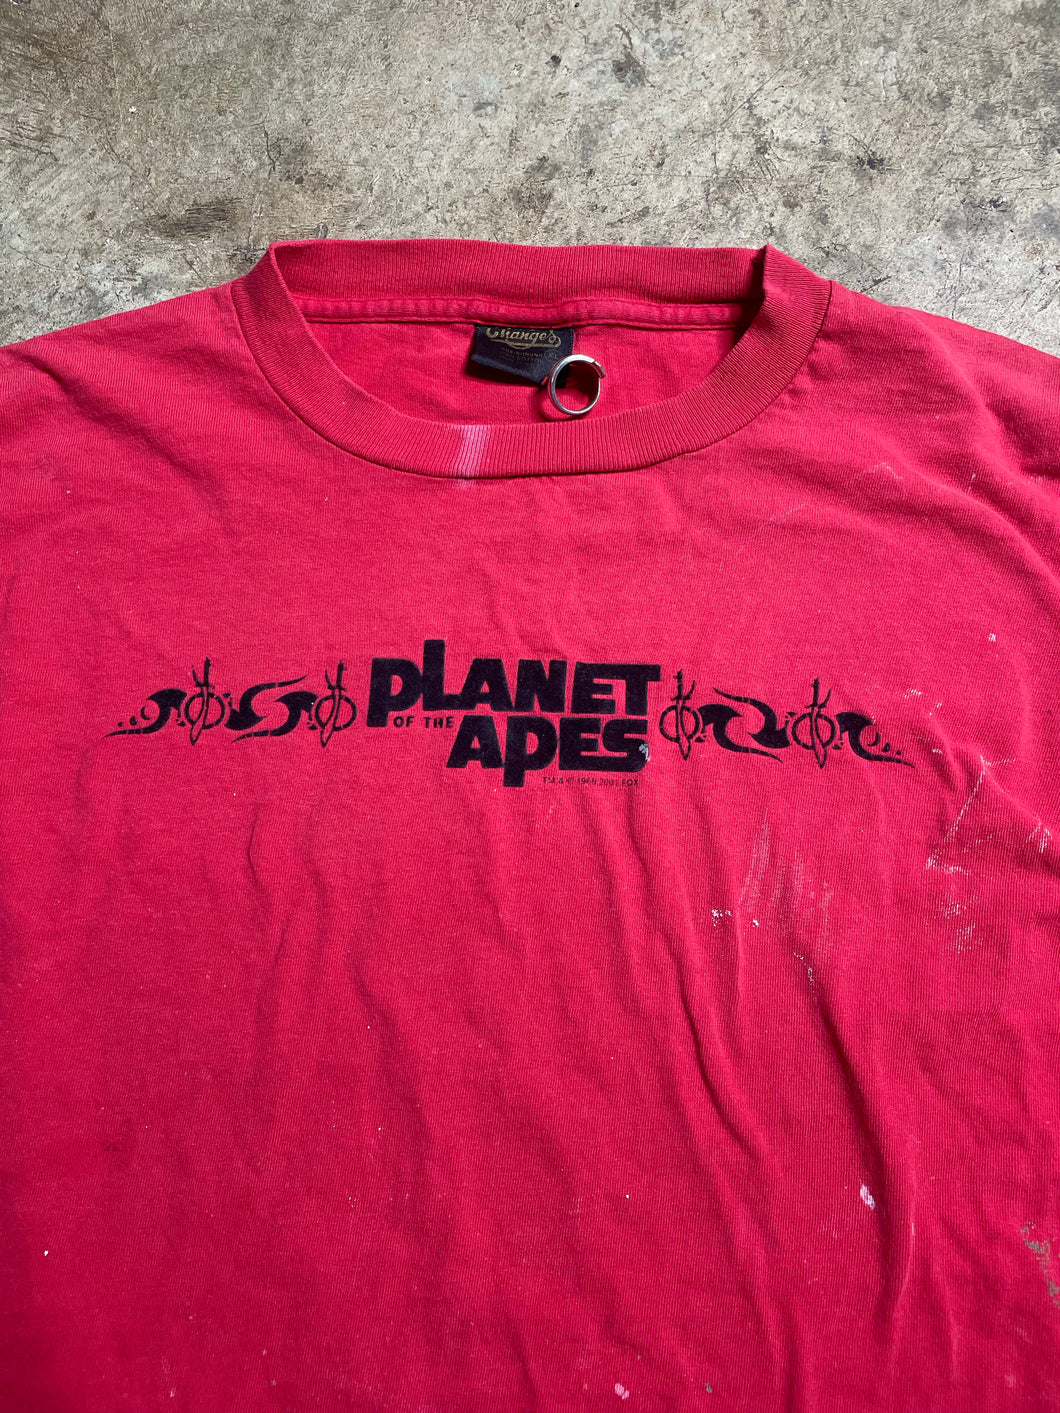 Y2K Planet of the Apes Tee - XL